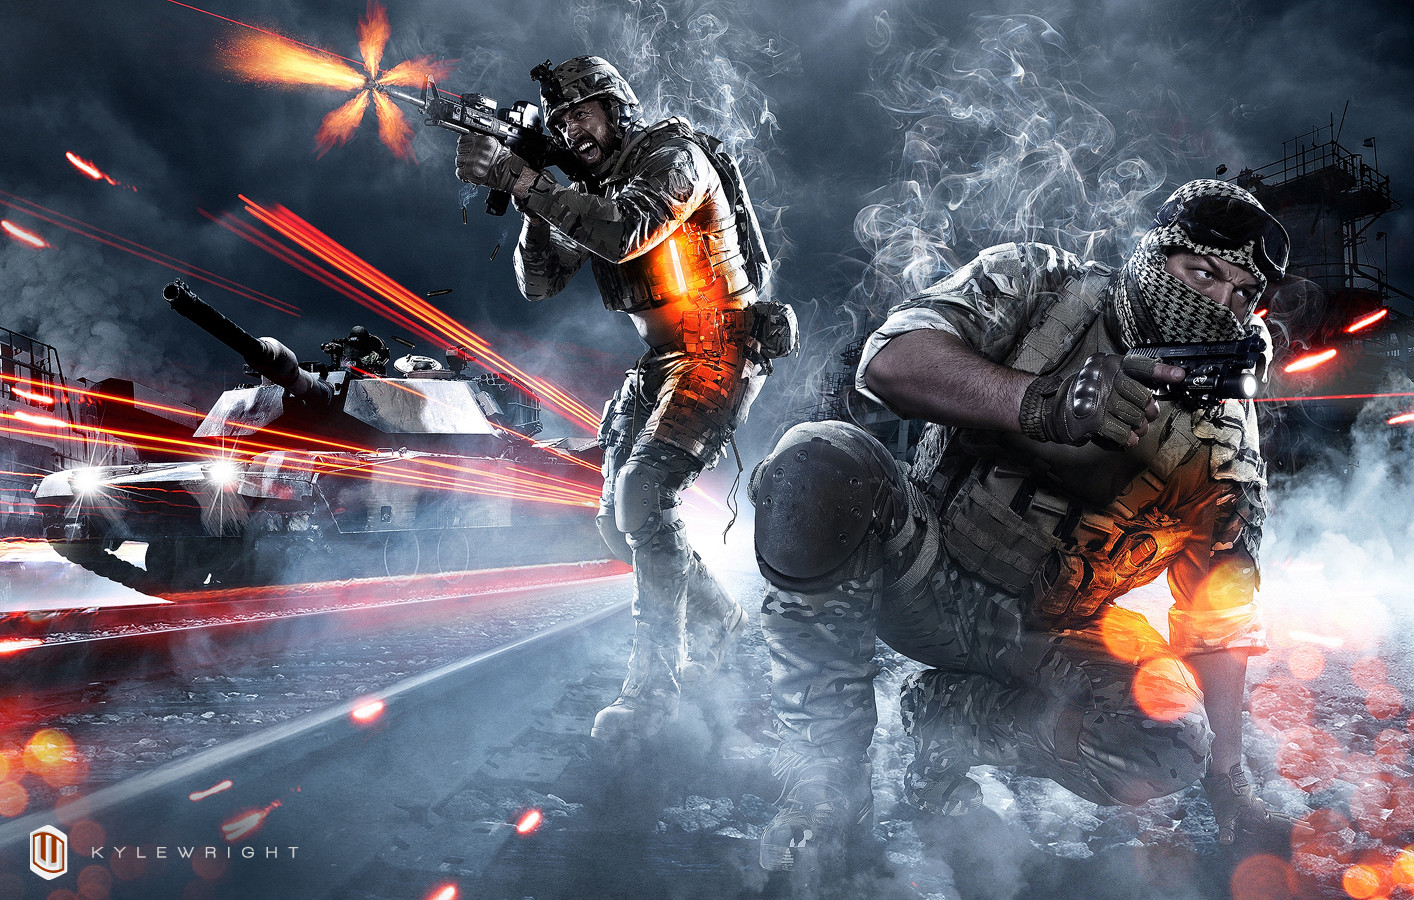 Battlefield 3 wallpapers for desktop, download free Battlefield 3 pictures  and backgrounds for PC 